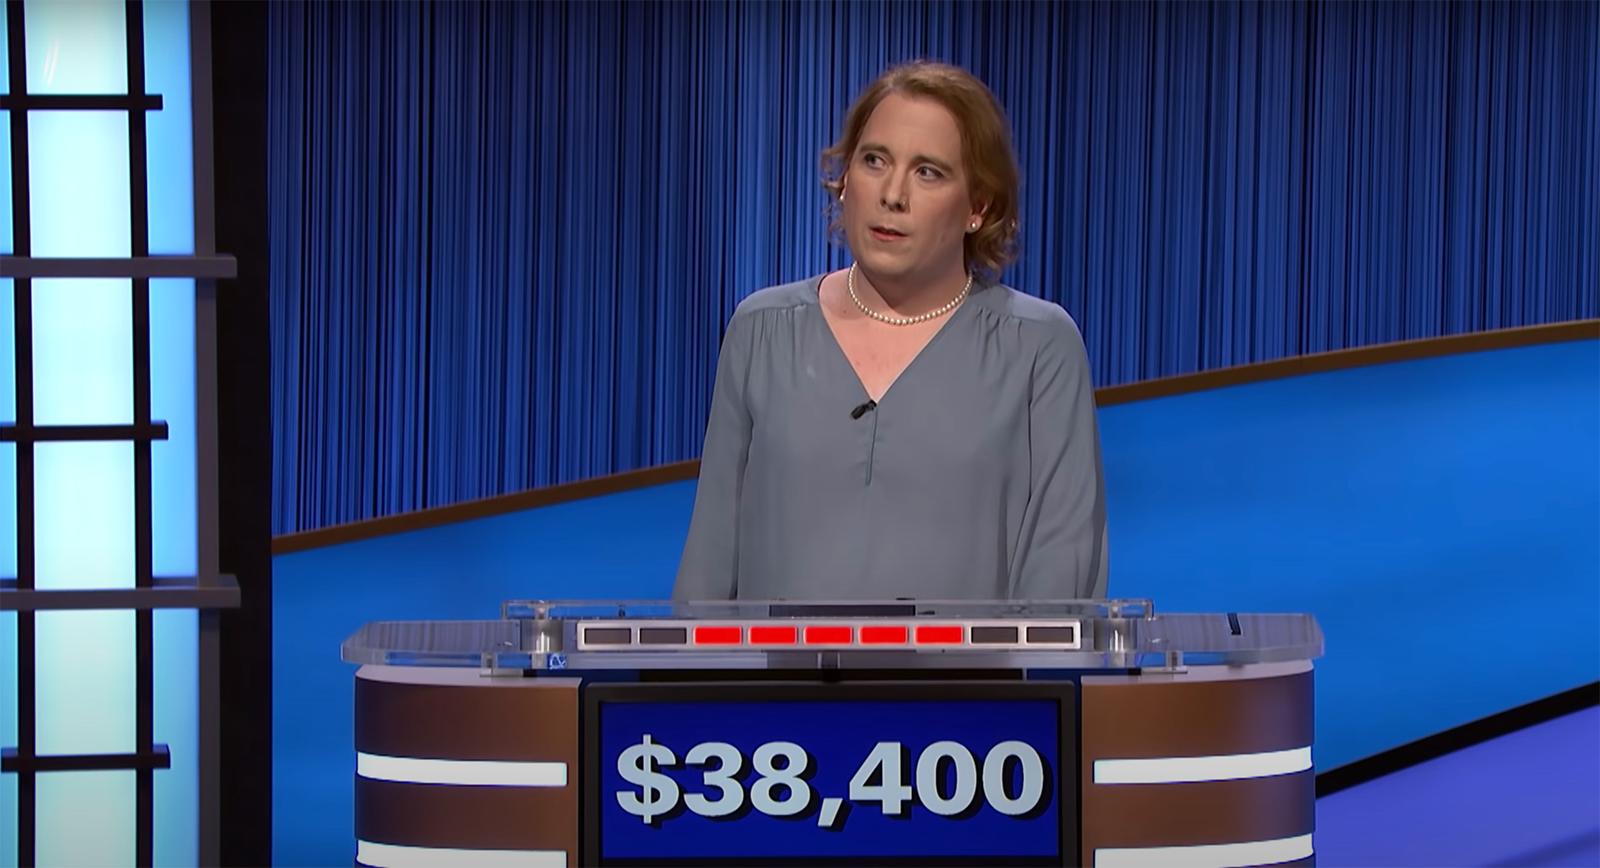 So You're Mixed Knowledge Brainiac? Prove It by Getting 18 on This Quiz Jeopardy